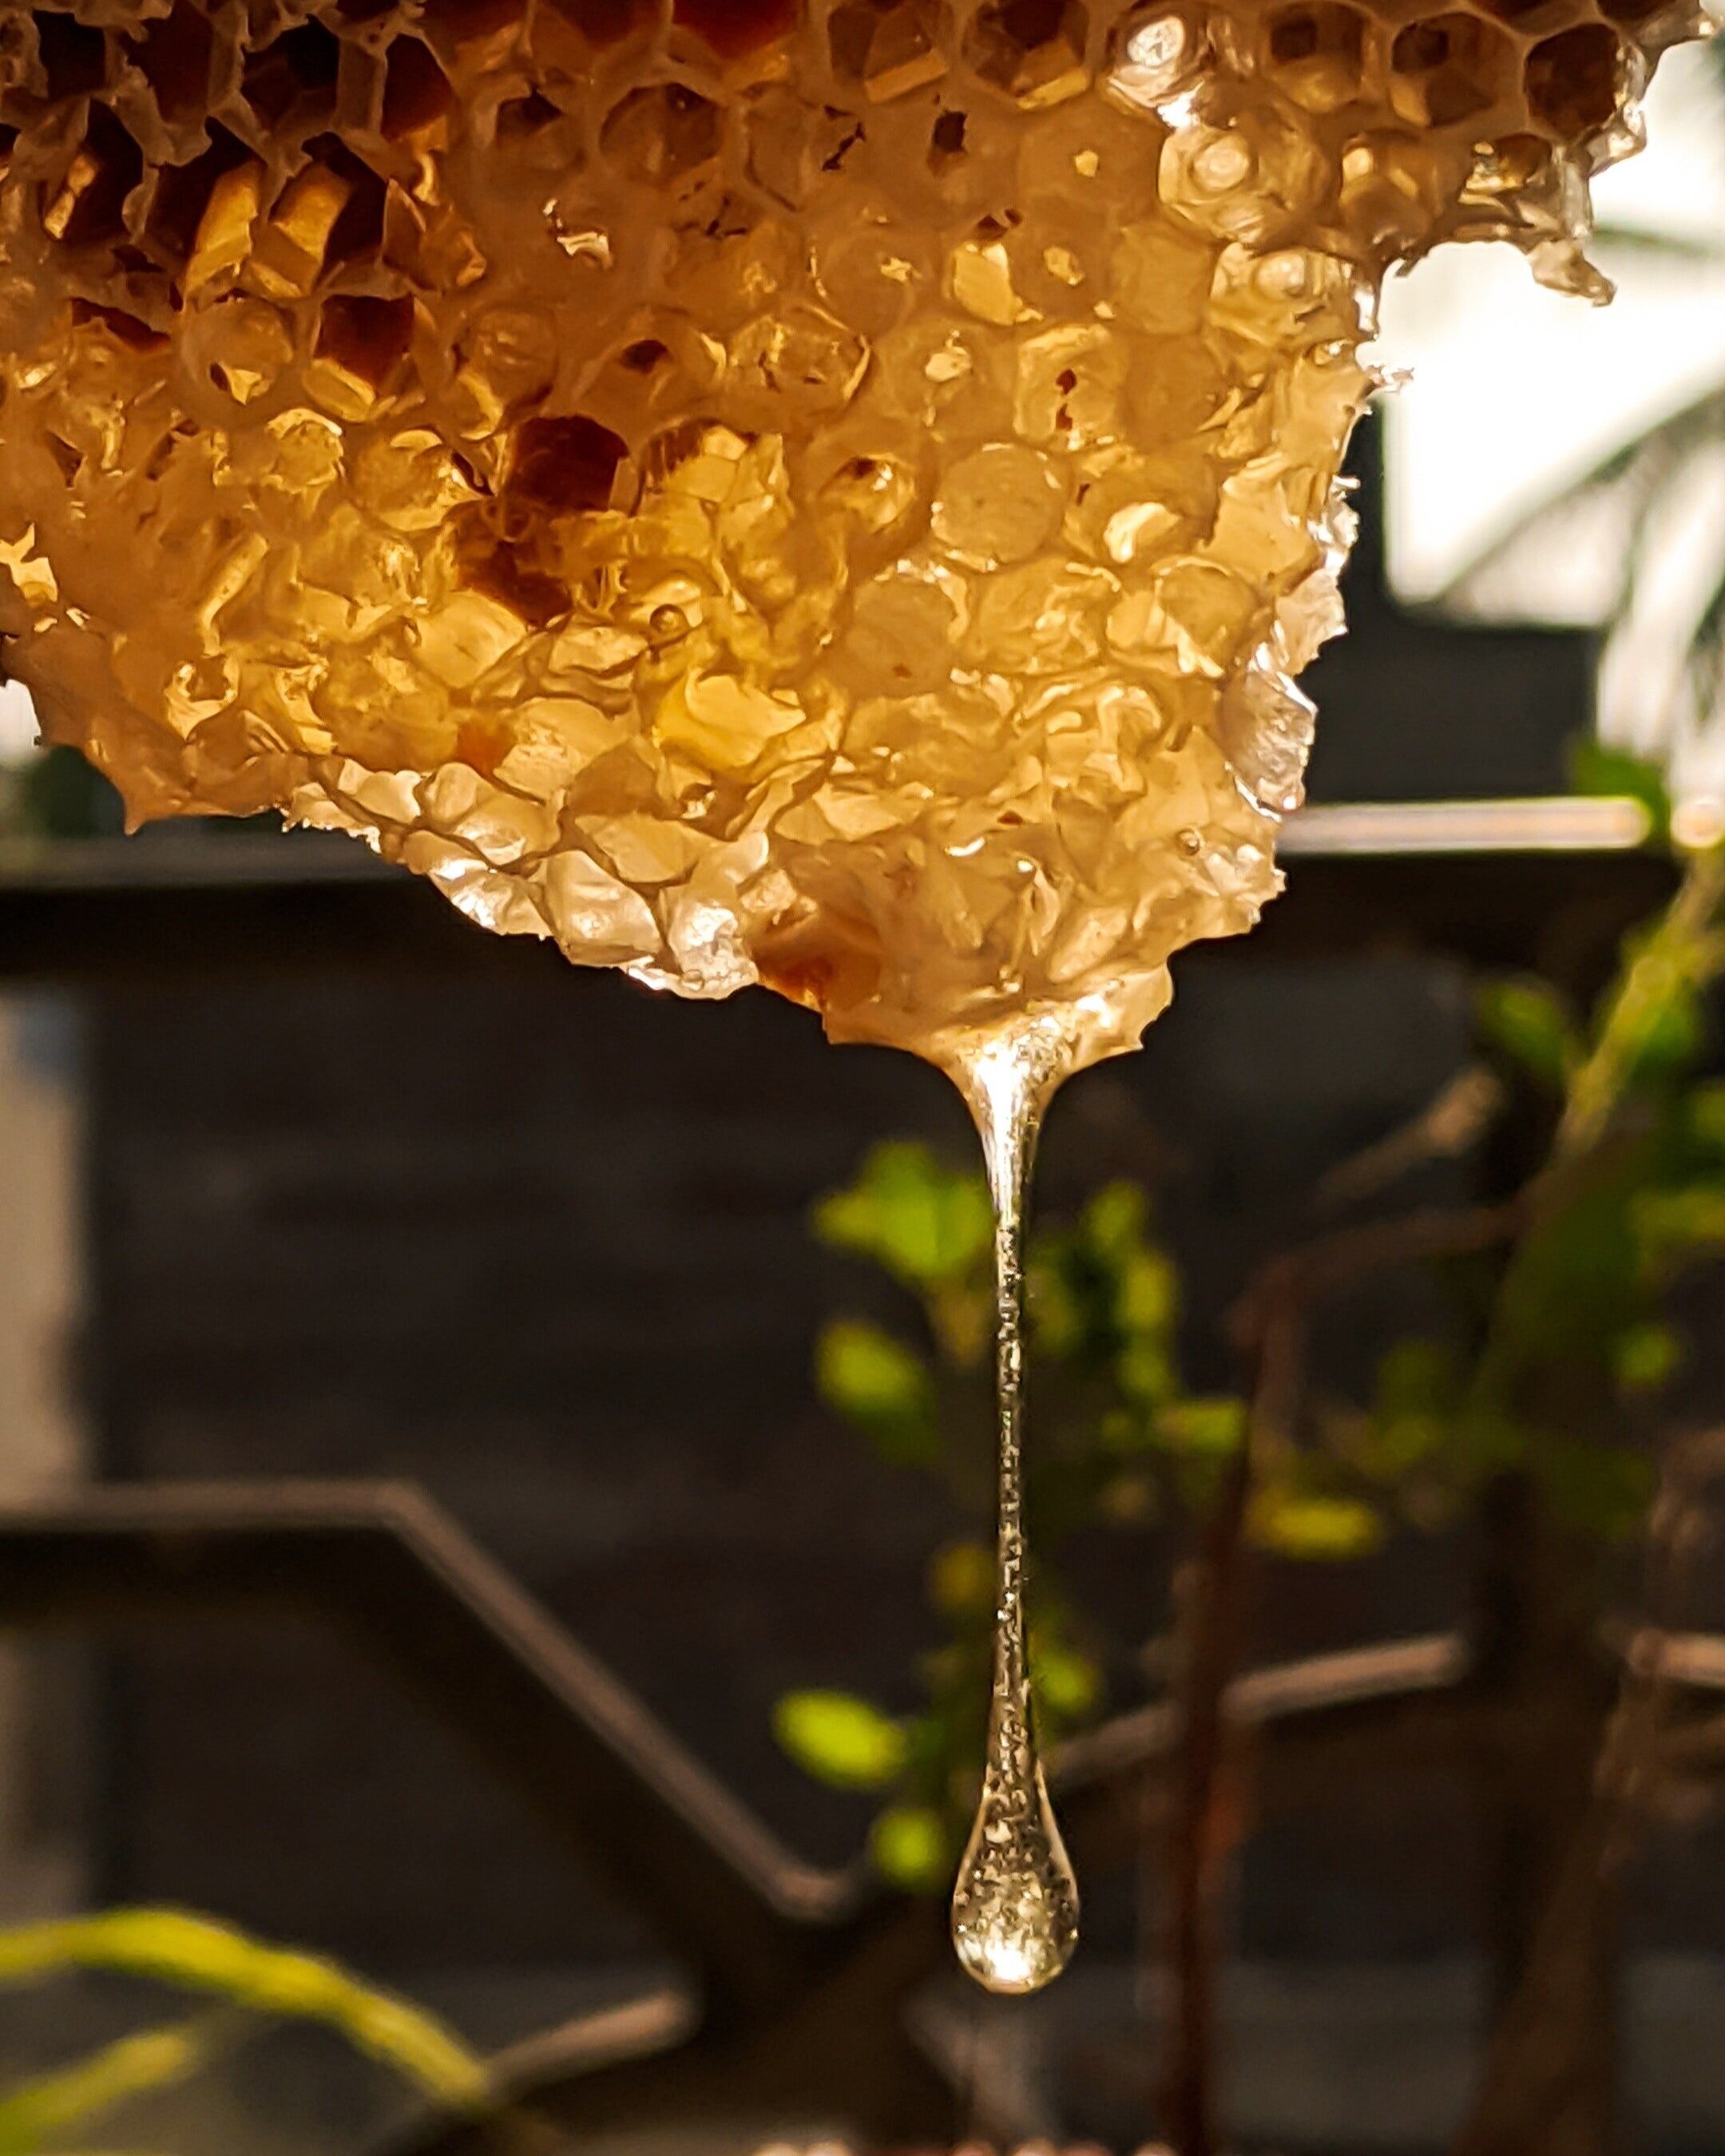 Pictured: honey comb dripping with honey.